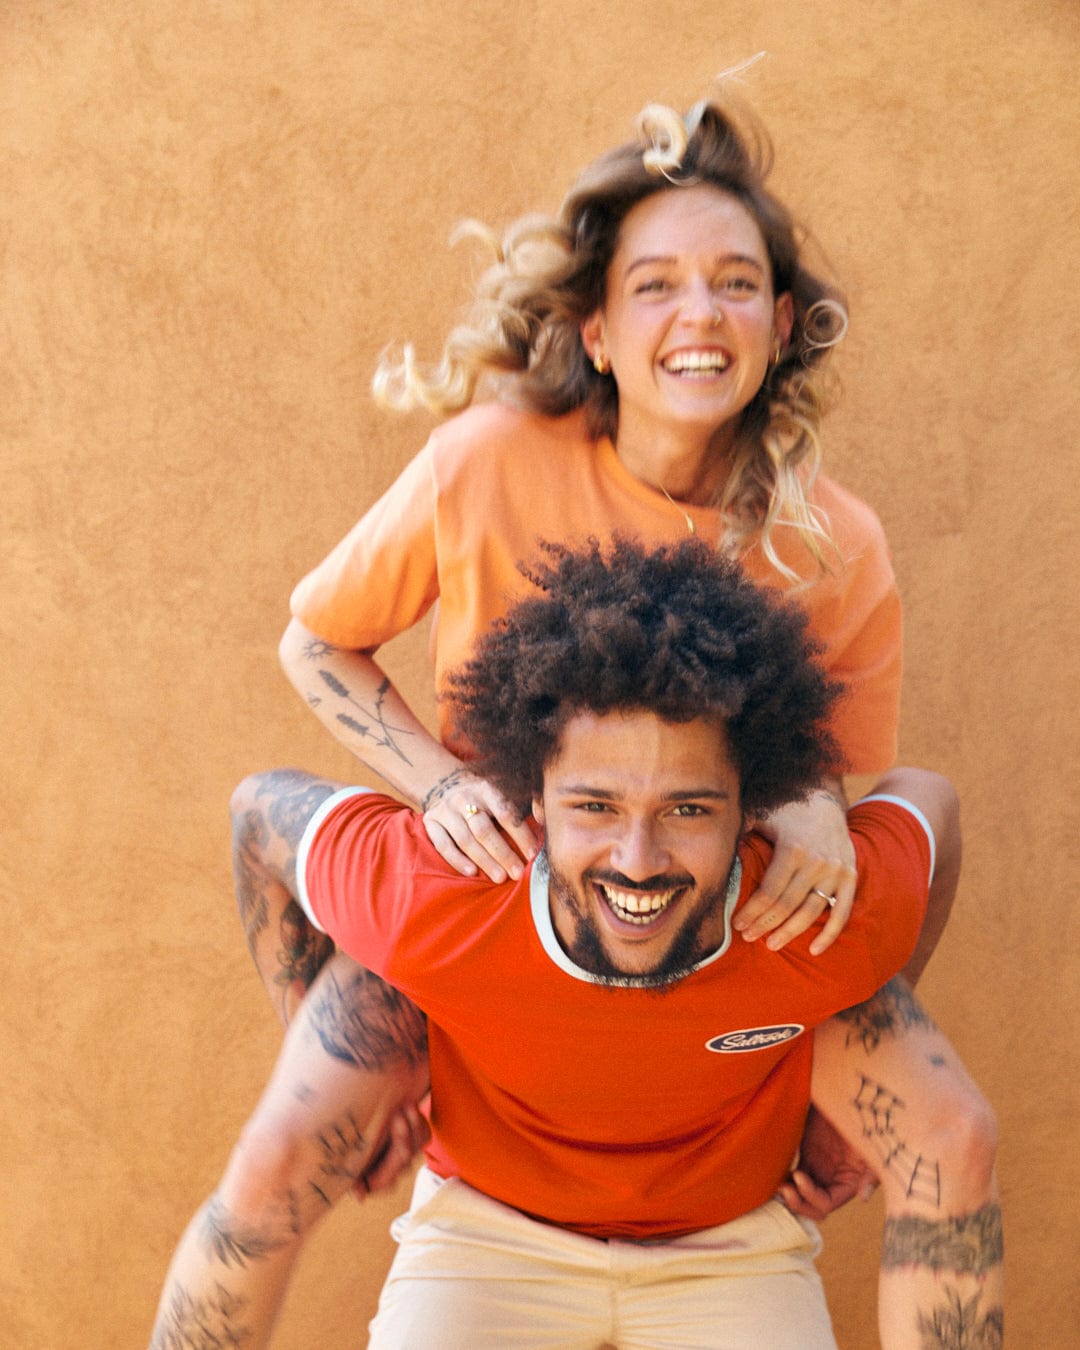 A smiling woman with blonde hair and an orange Saltrock Sunshine - Recycled Womens Cropped T-Shirt - Orange is piggybacking on a smiling man with curly hair and a red shirt, both showcasing their tattoos. The scene emits Saltrock branding vibes against the plain brown wall backdrop.